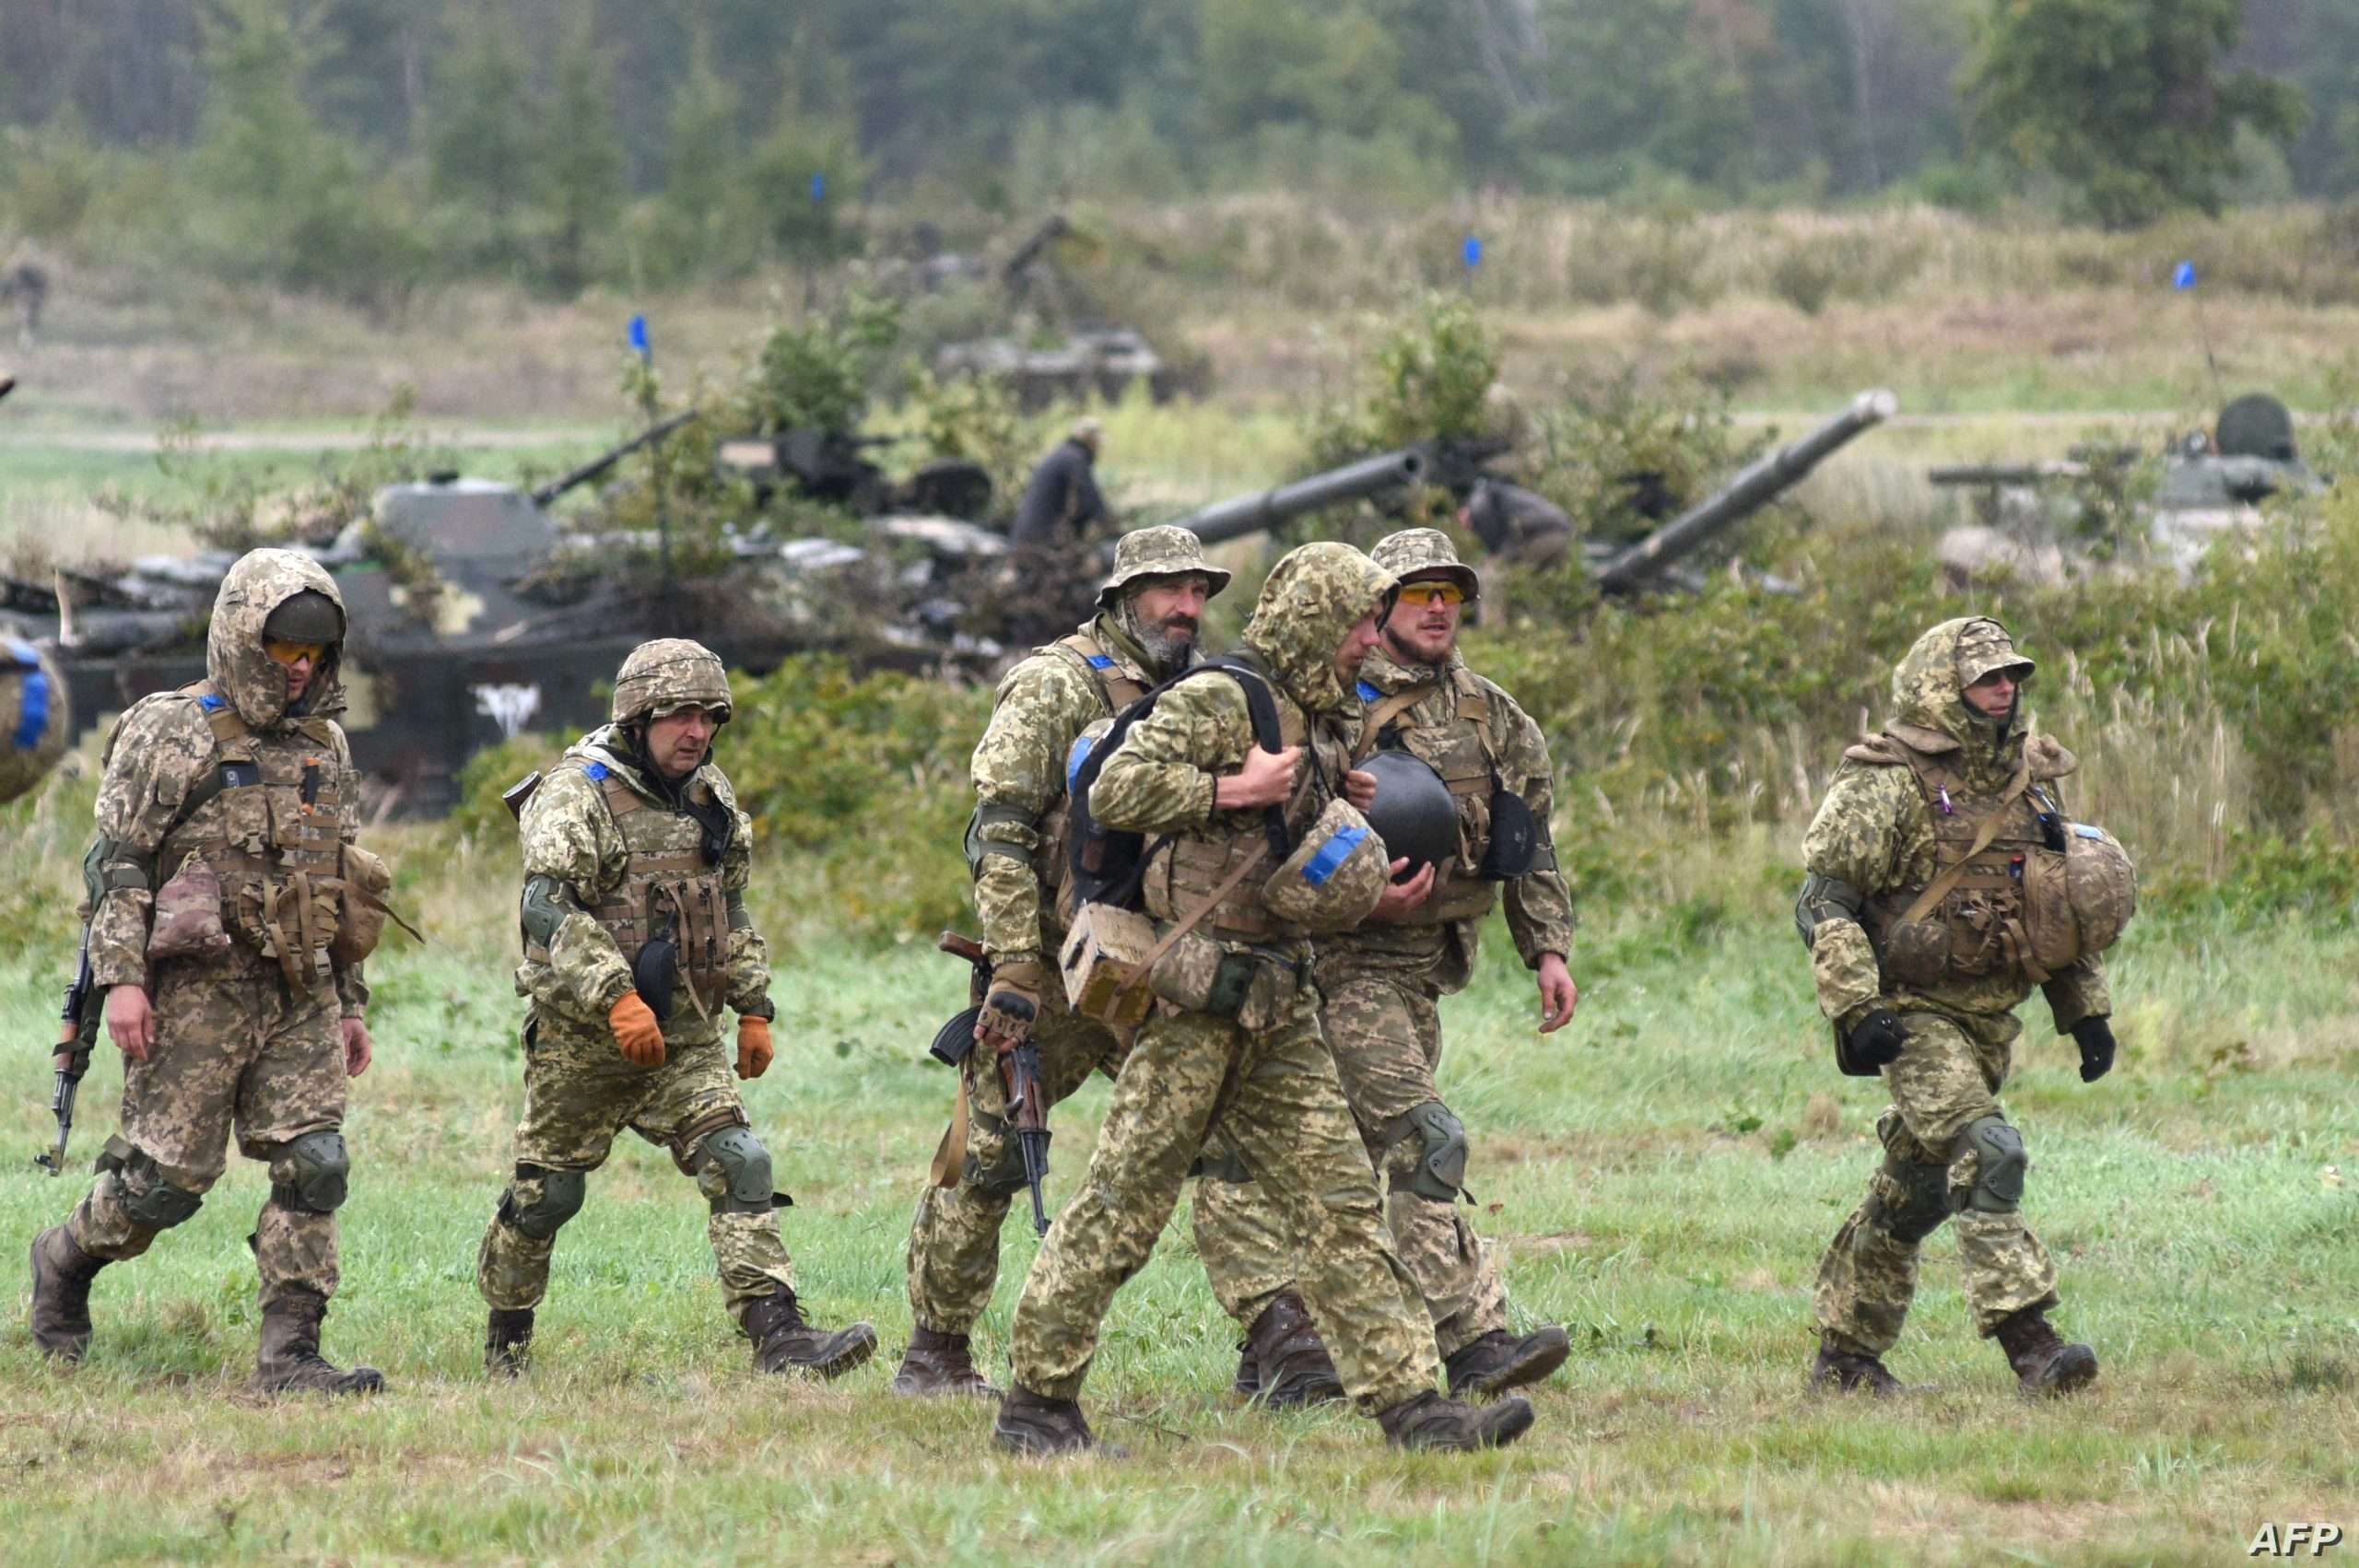 Ukrainian servicemen take part in the joint Rapid Trident military exercises with the United States and other NATO countries nor far from Lviv on September 24, 2021, as tensions with Russia remain high over the Kremlin-backed insurgency in the country's east. - The annual Rapid Trident military exercises, taking place in western Ukrainian until October 1, involve some 6,000 soldiers from 15 countries, Ukraine's defence ministry said in a statement. (Photo by Yuriy DYACHYSHYN / AFP)